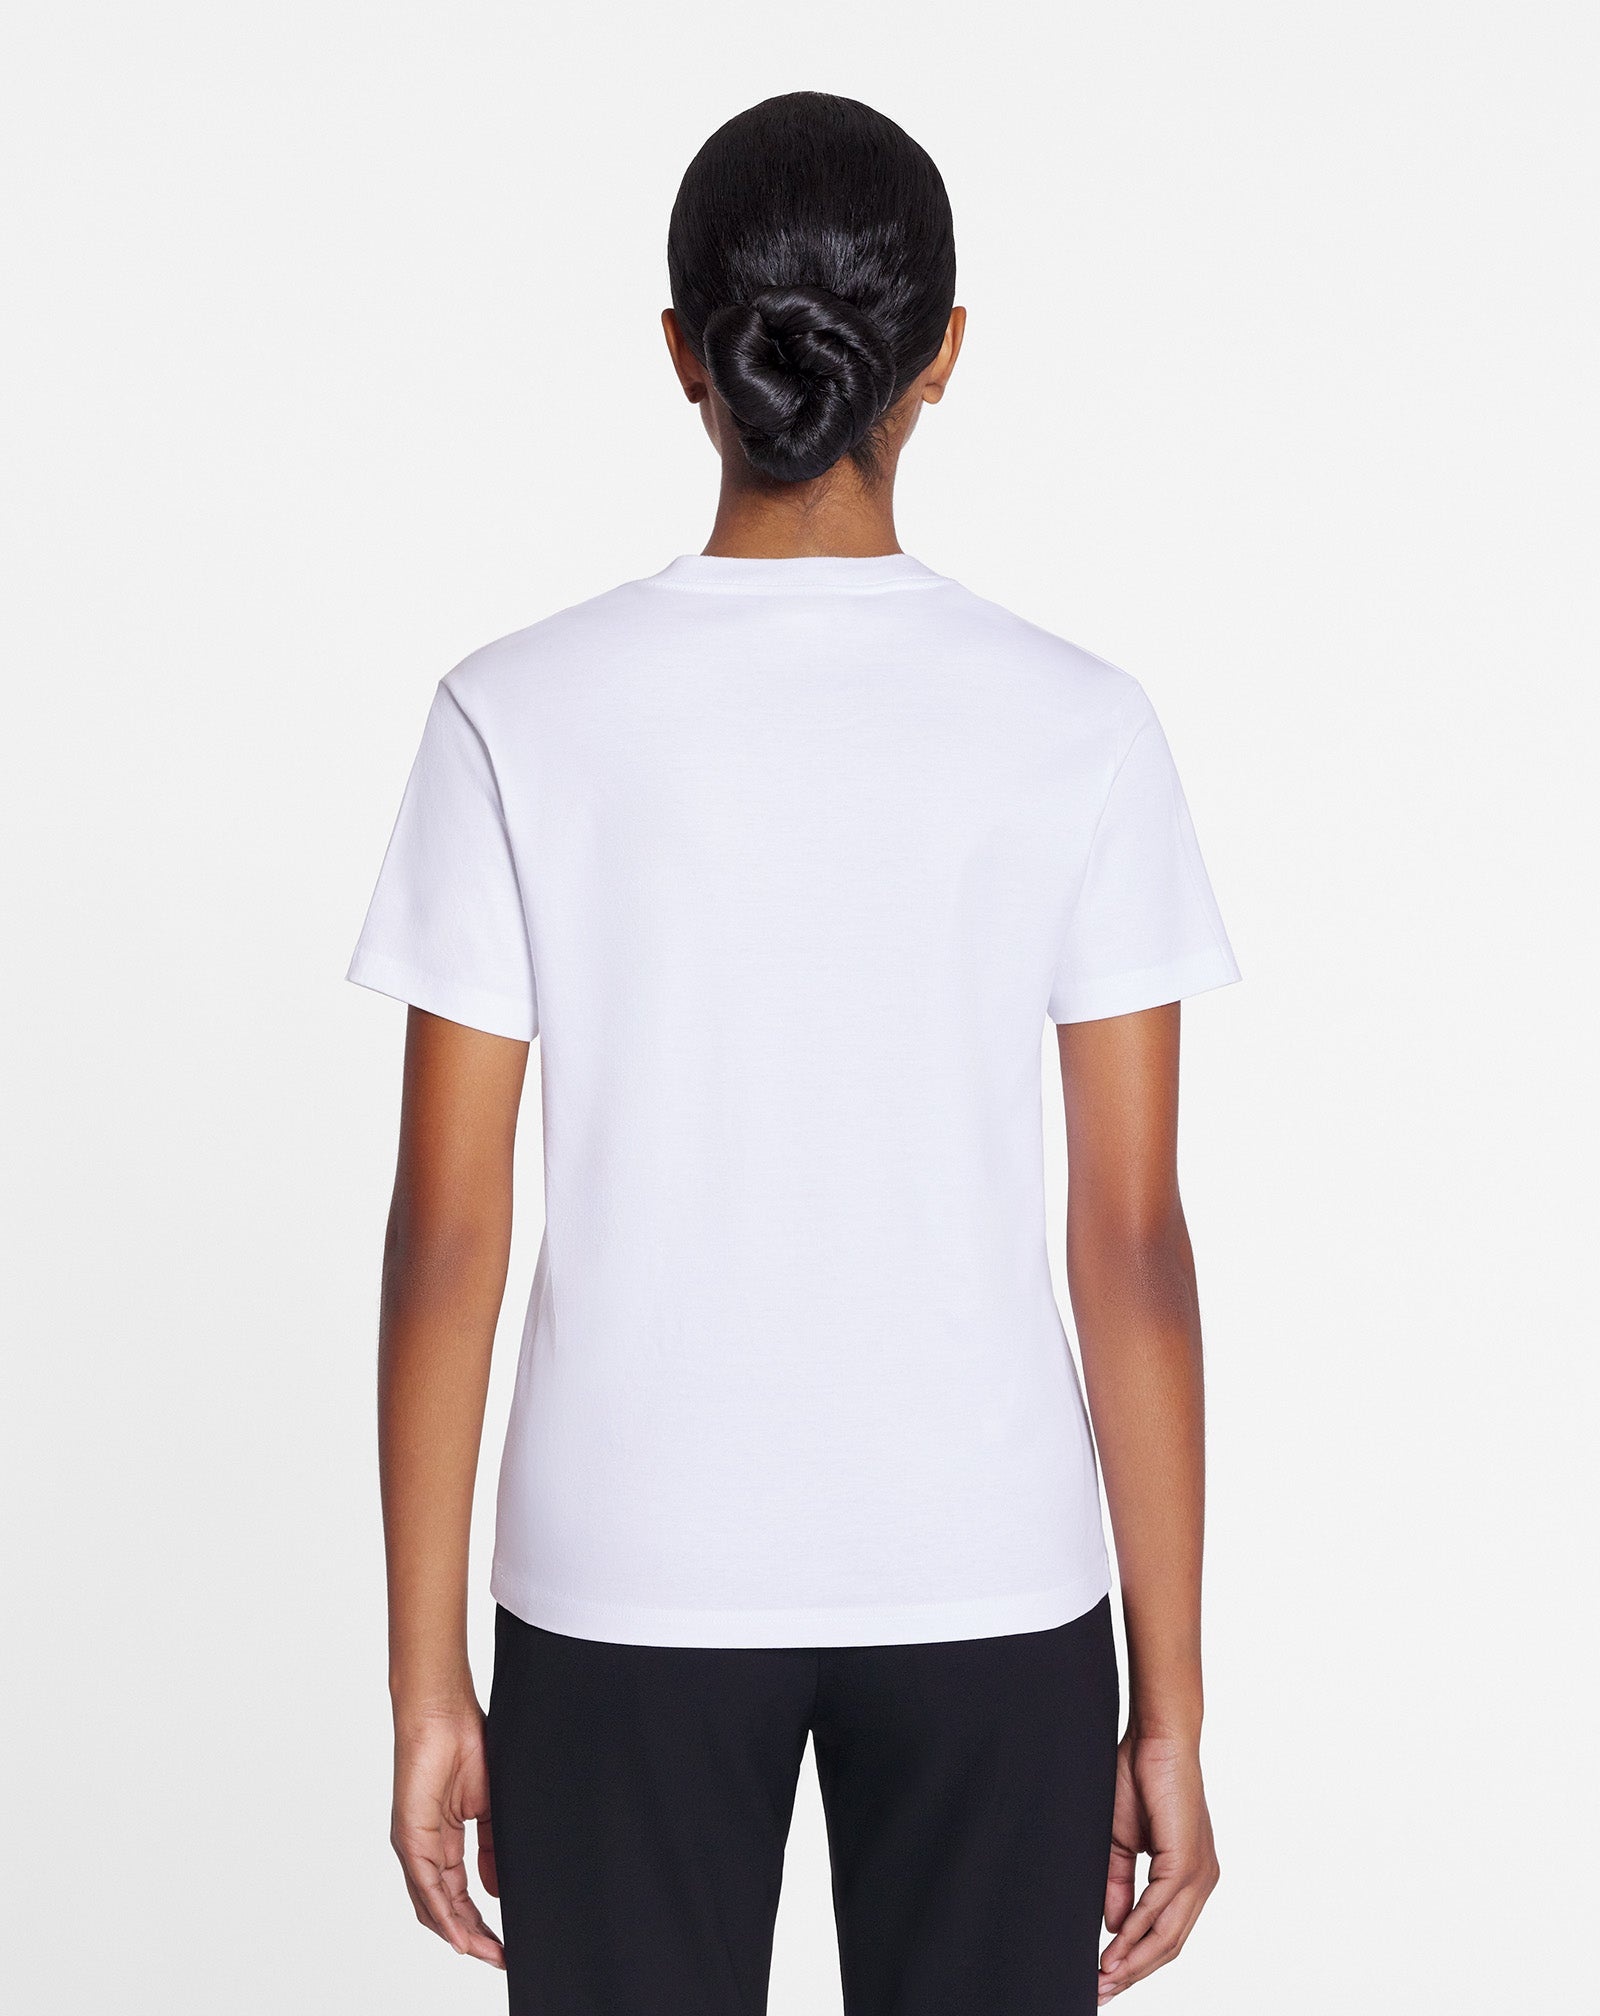 LANVIN EMBROIDERED CLASSIC T-SHIRT - 4